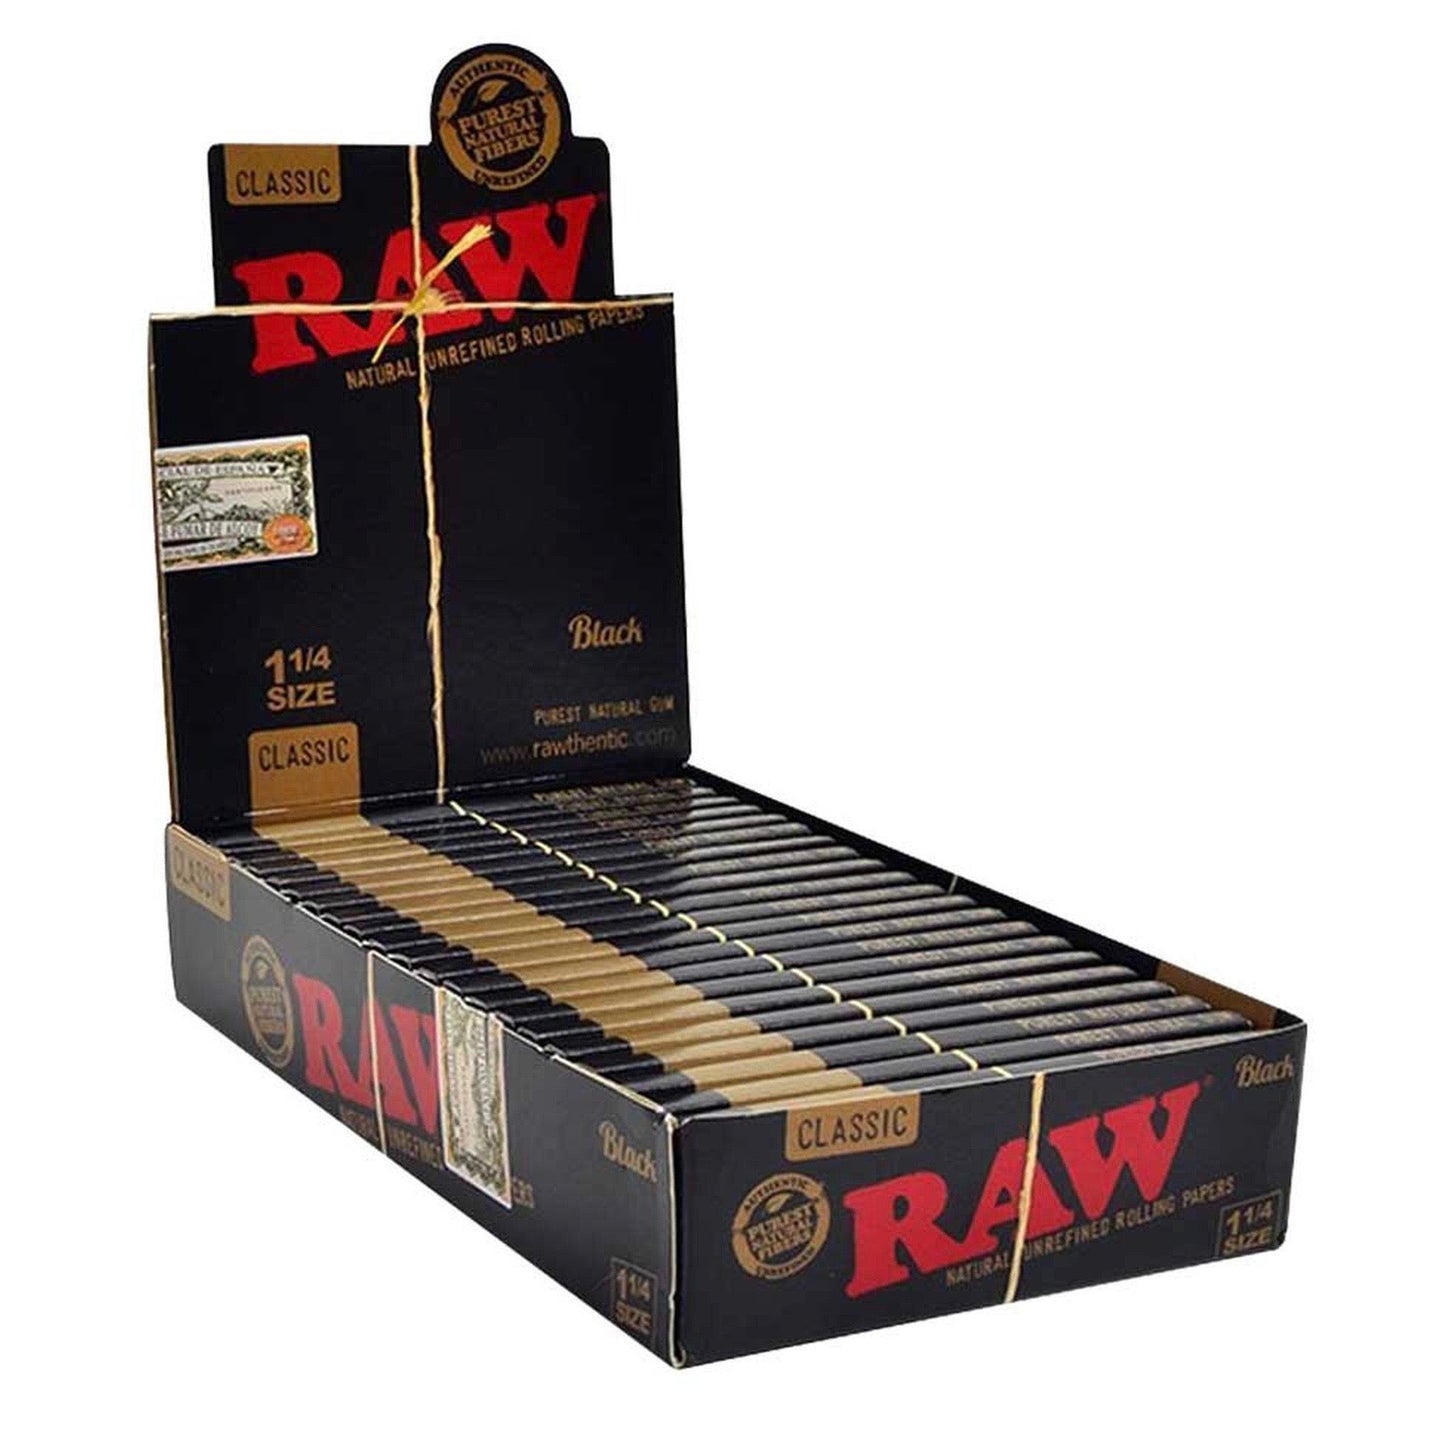 Raw Classic Black 1.25" Rolling Papers